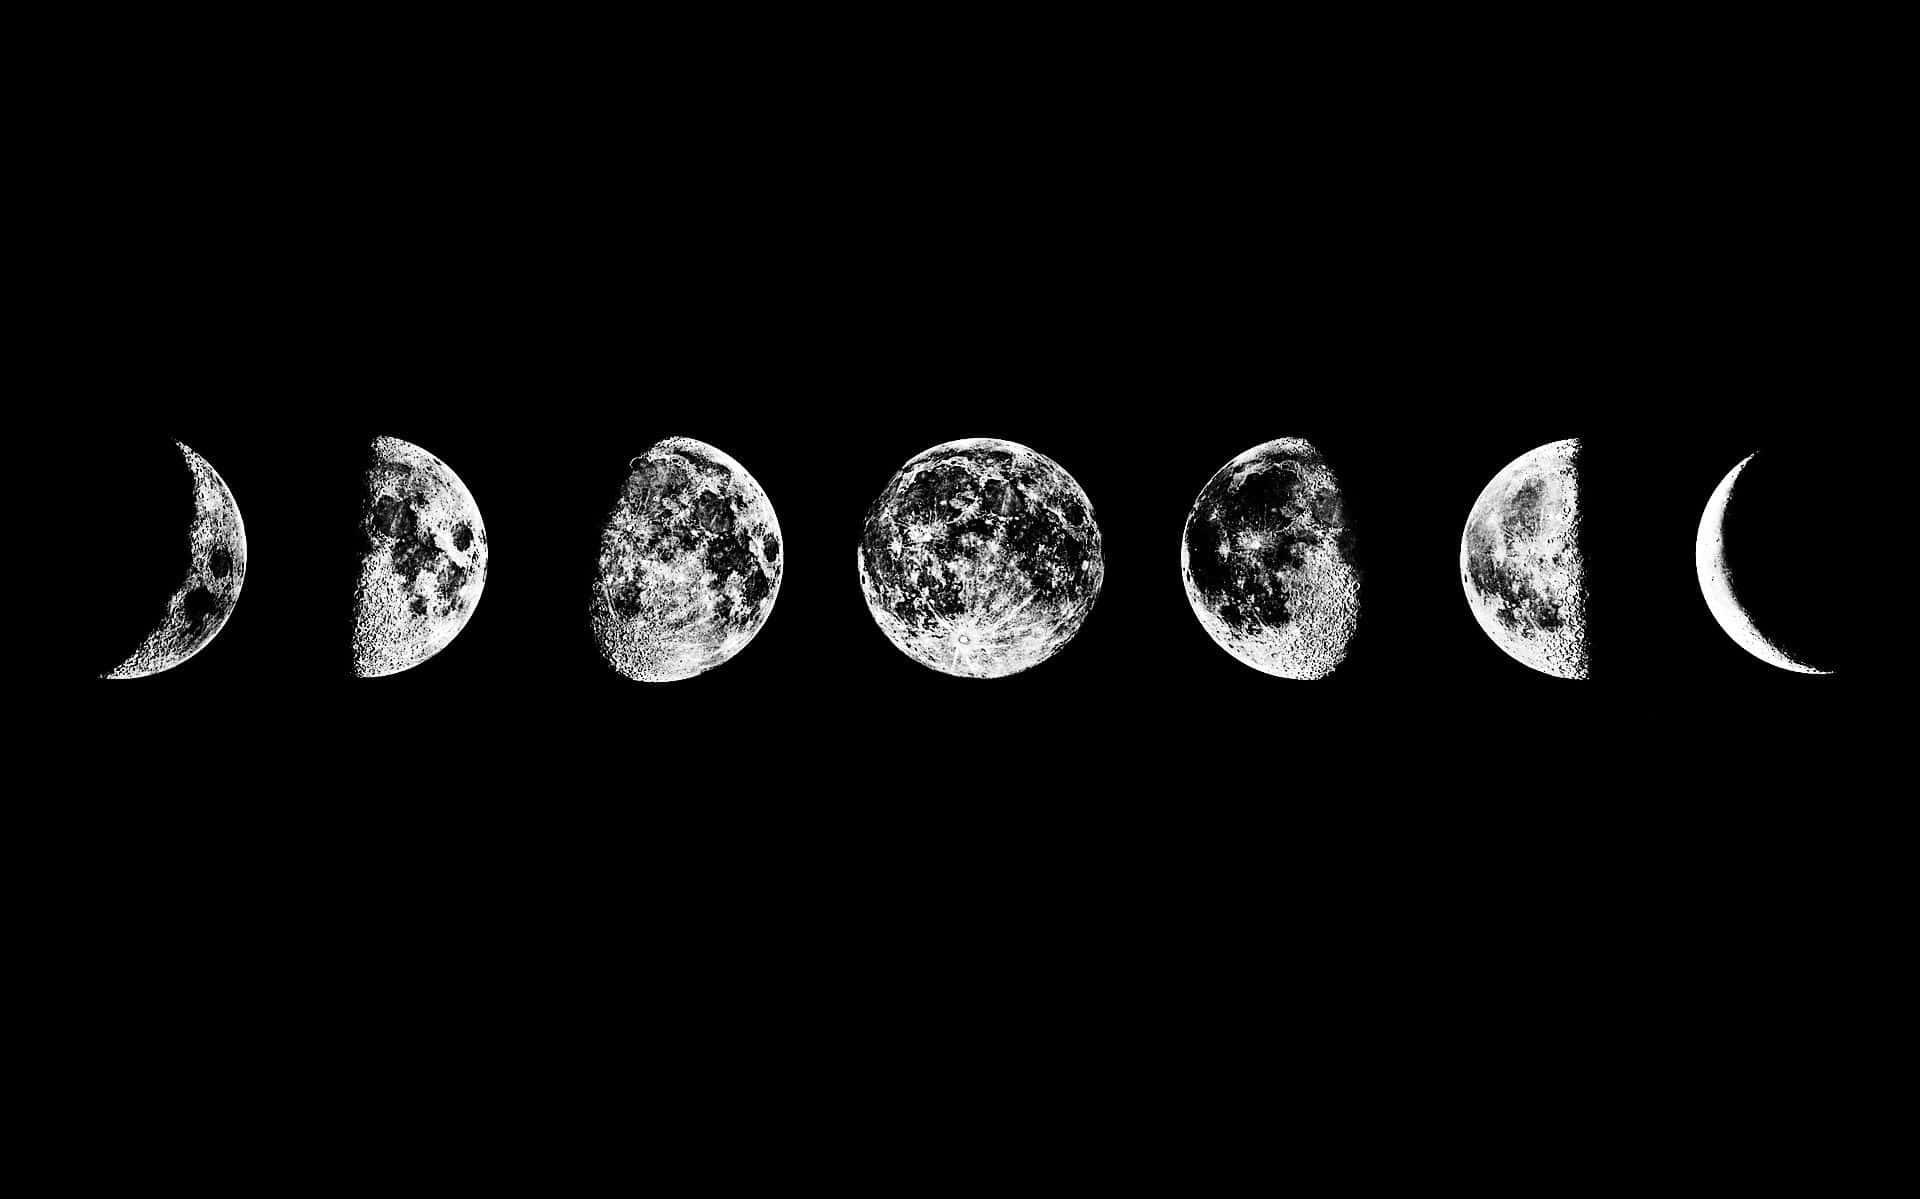 The Moon Phases In Black And White Wallpaper